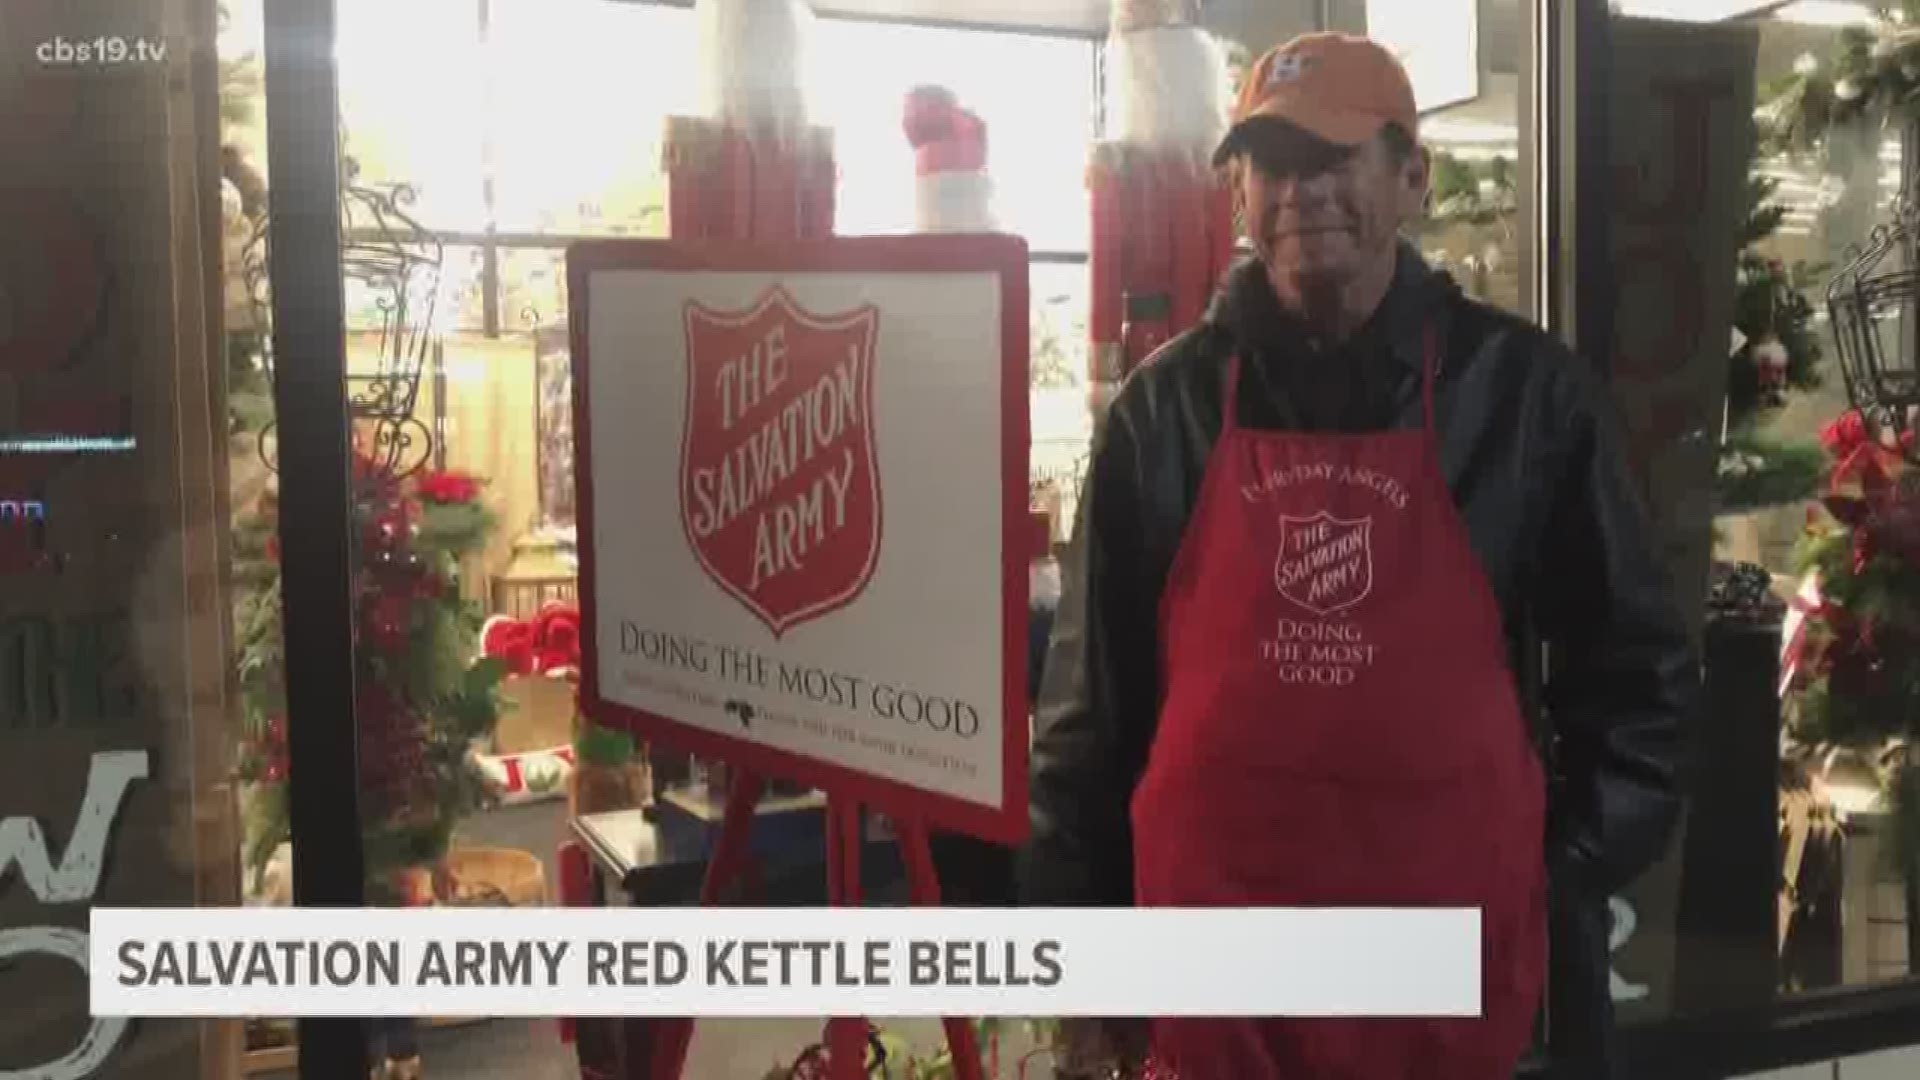 Salvation Army red kettle bells